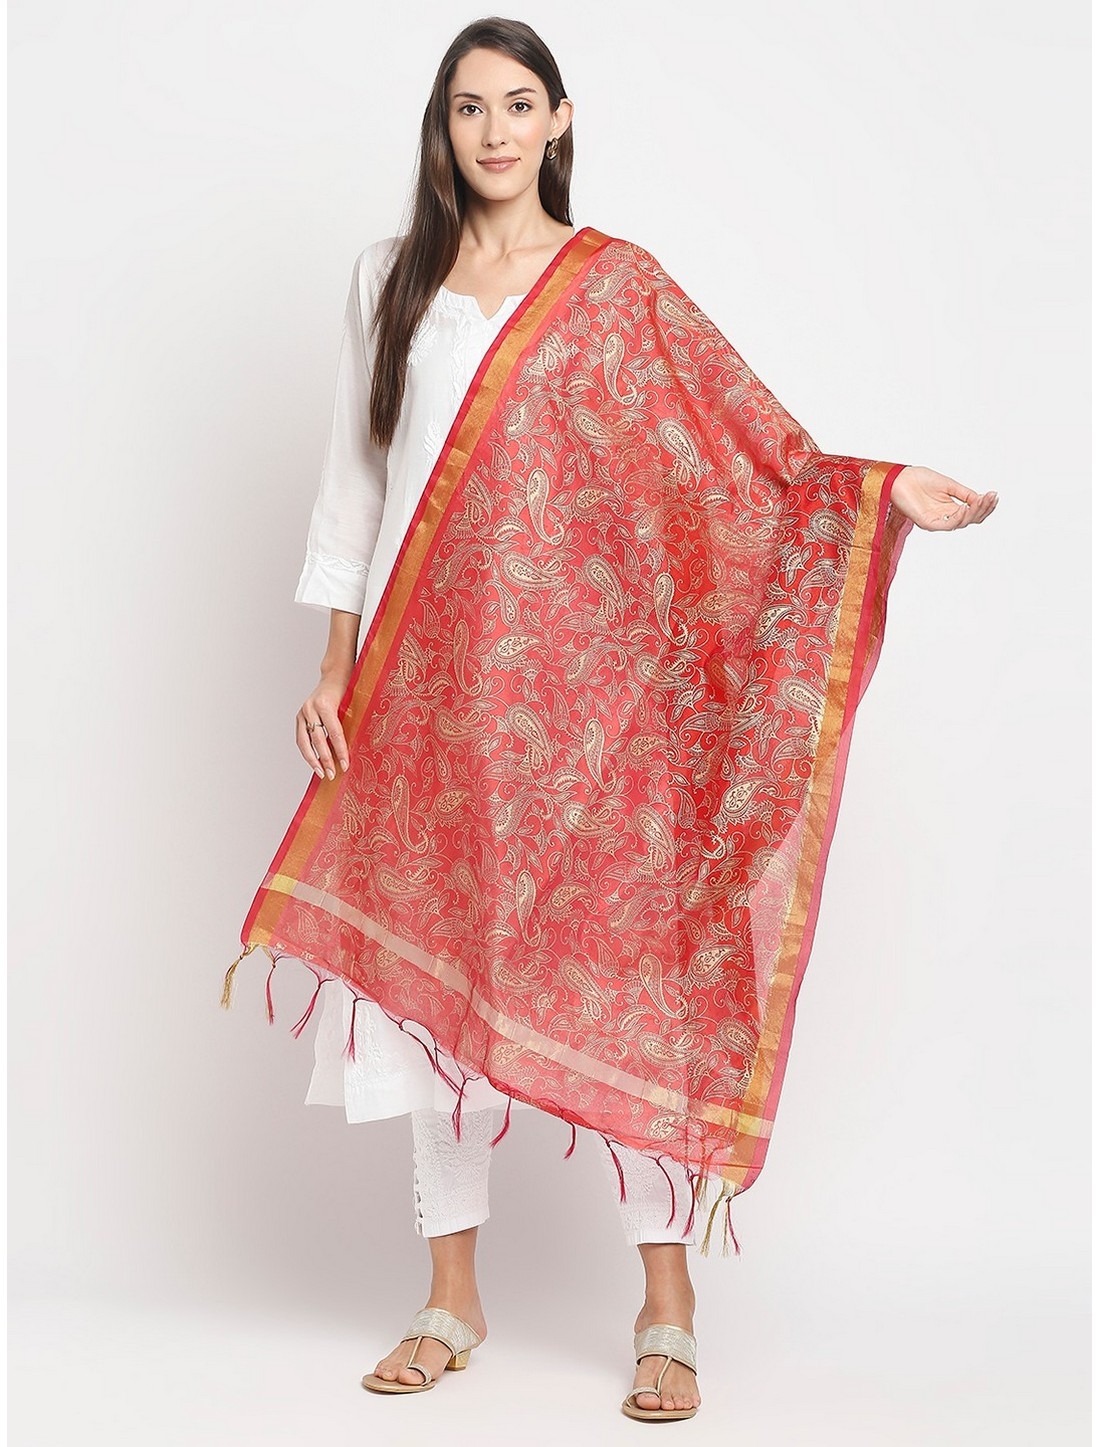 Get Wrapped | Get Wrapped Red  Foil Printed Dupatta with Borders  for Women